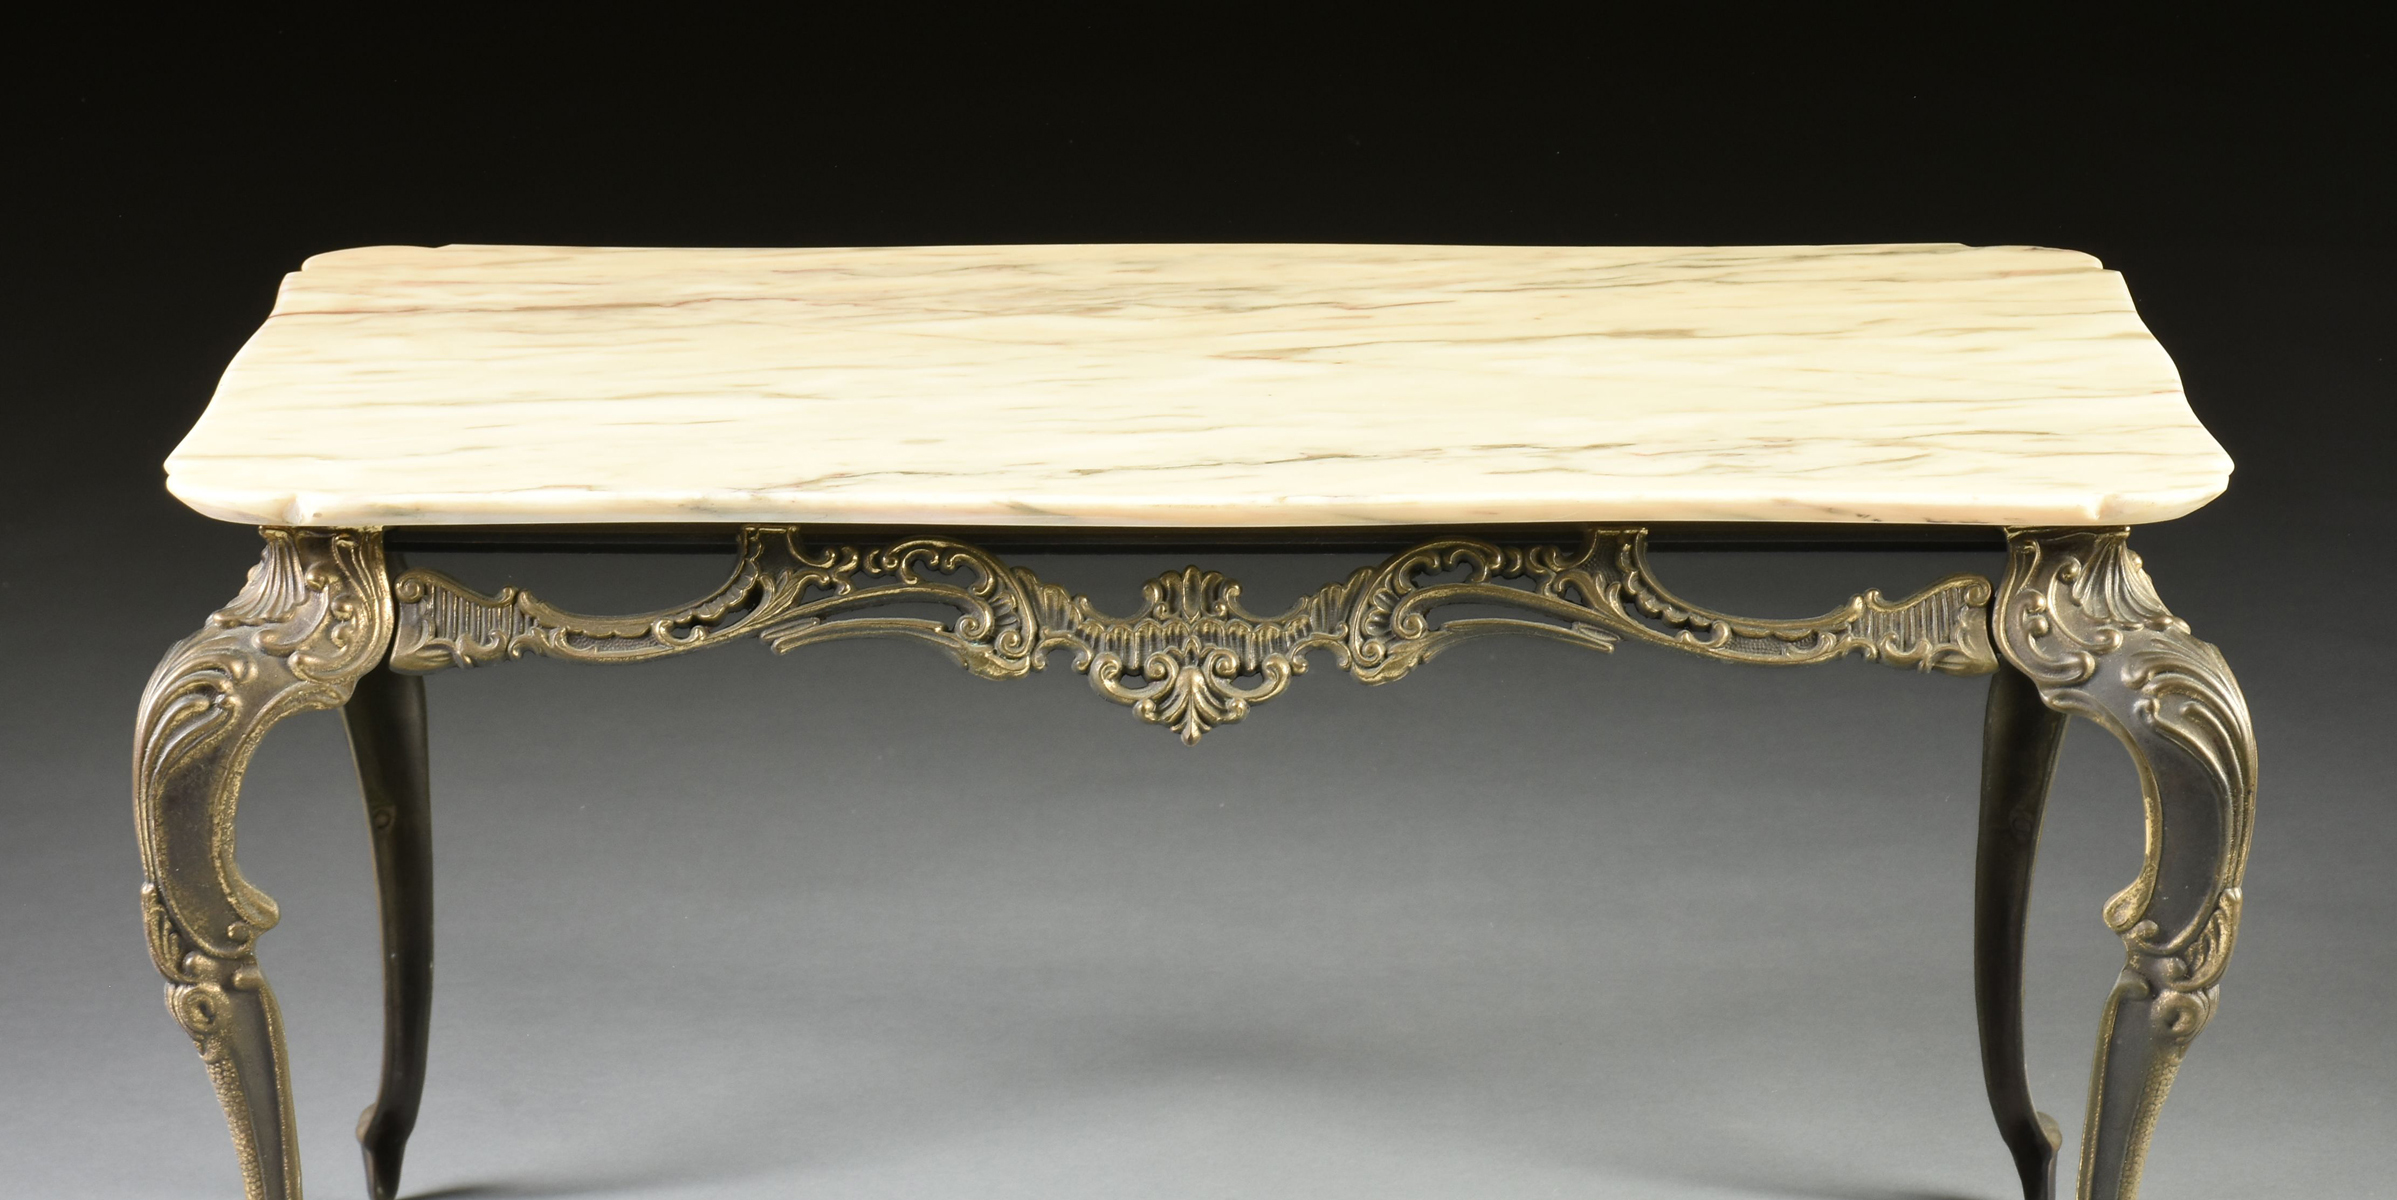 A ROCOCO REVIVAL MARBLE TOP GILT BRASS COFFEE TABLE, EARLY/MID 20TH CENTURY, the serpentine edge - Image 3 of 9